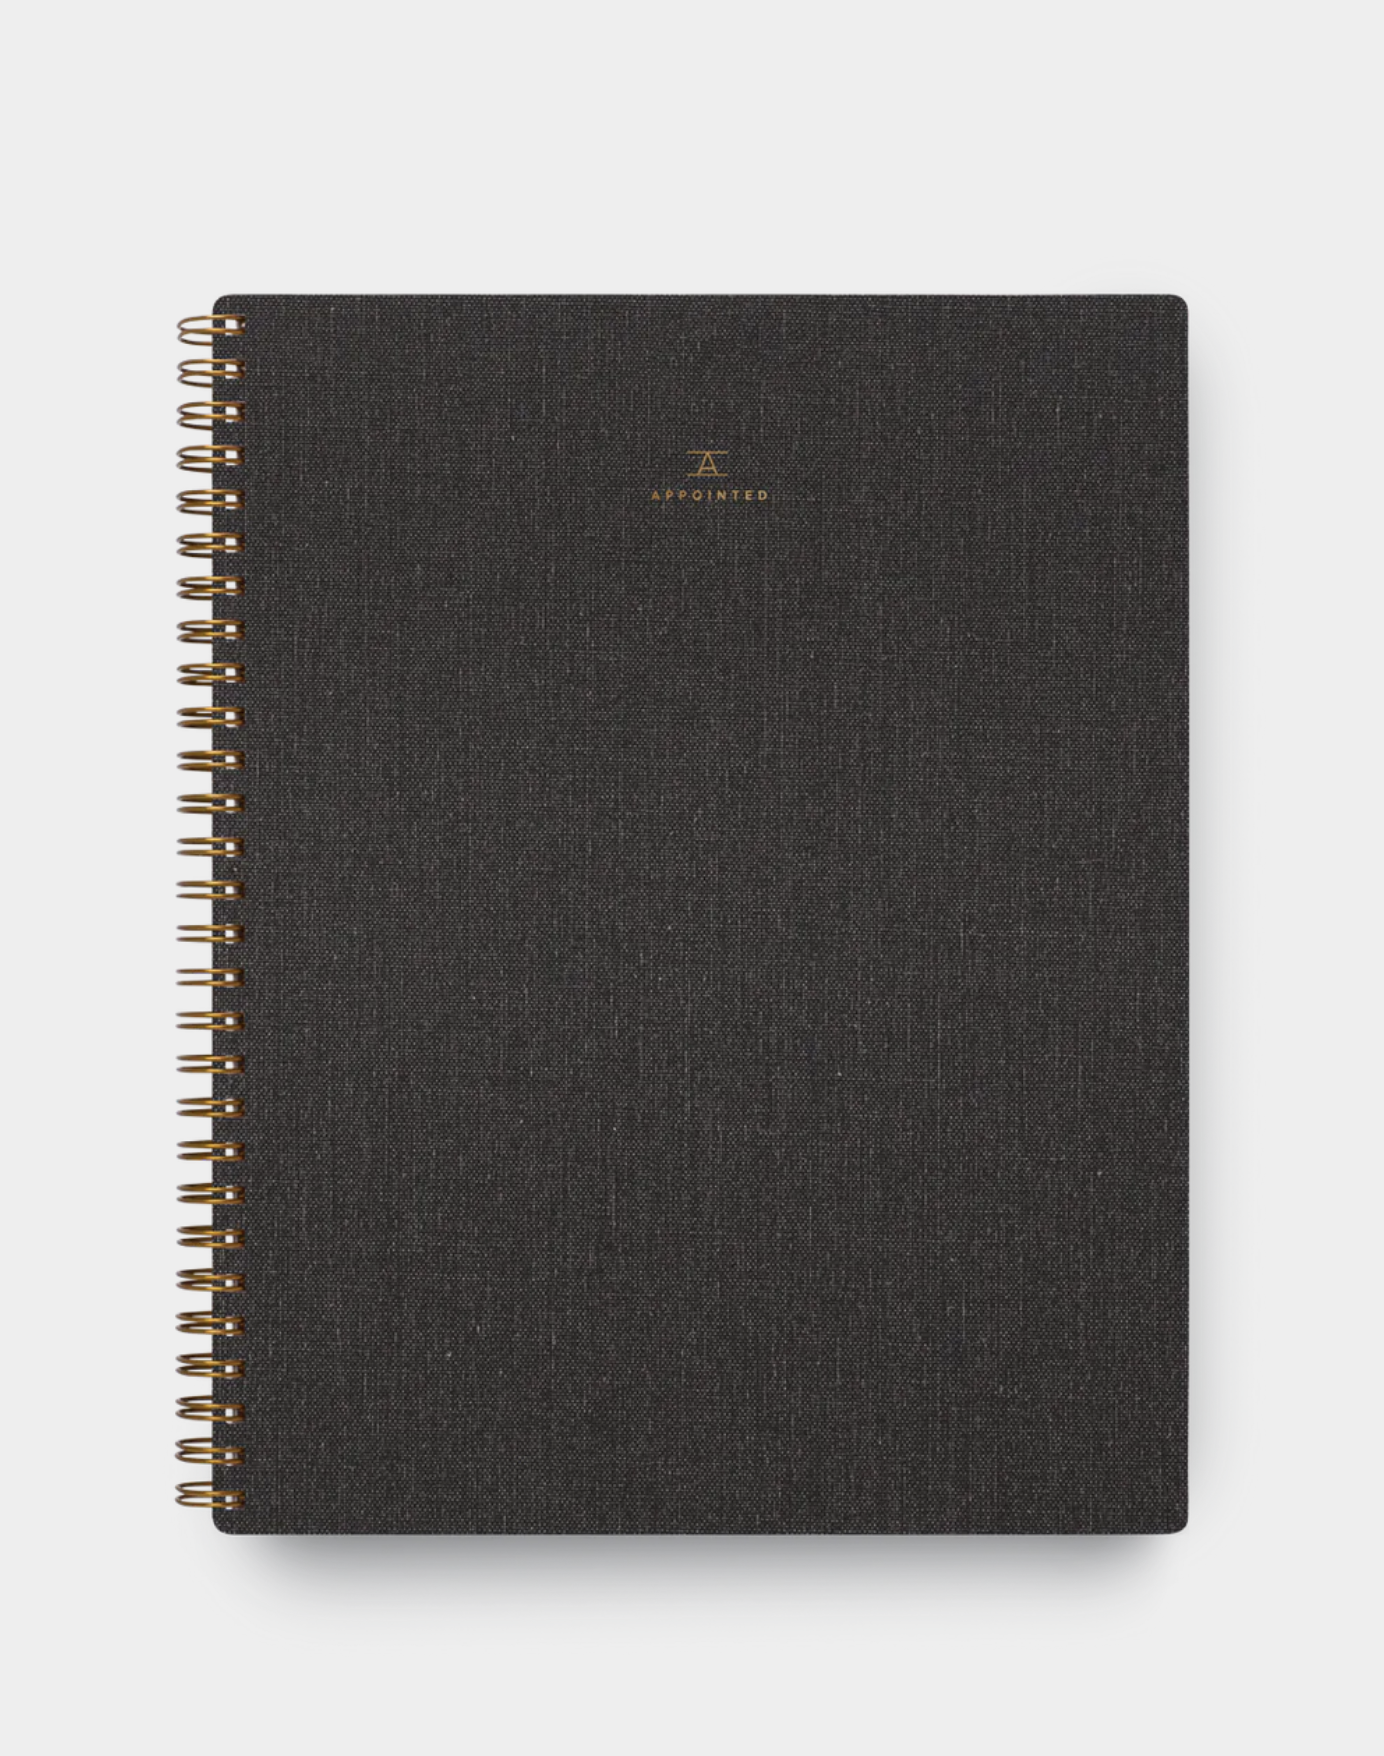 Appointed Notebook | Lined - Miss Parfaite 